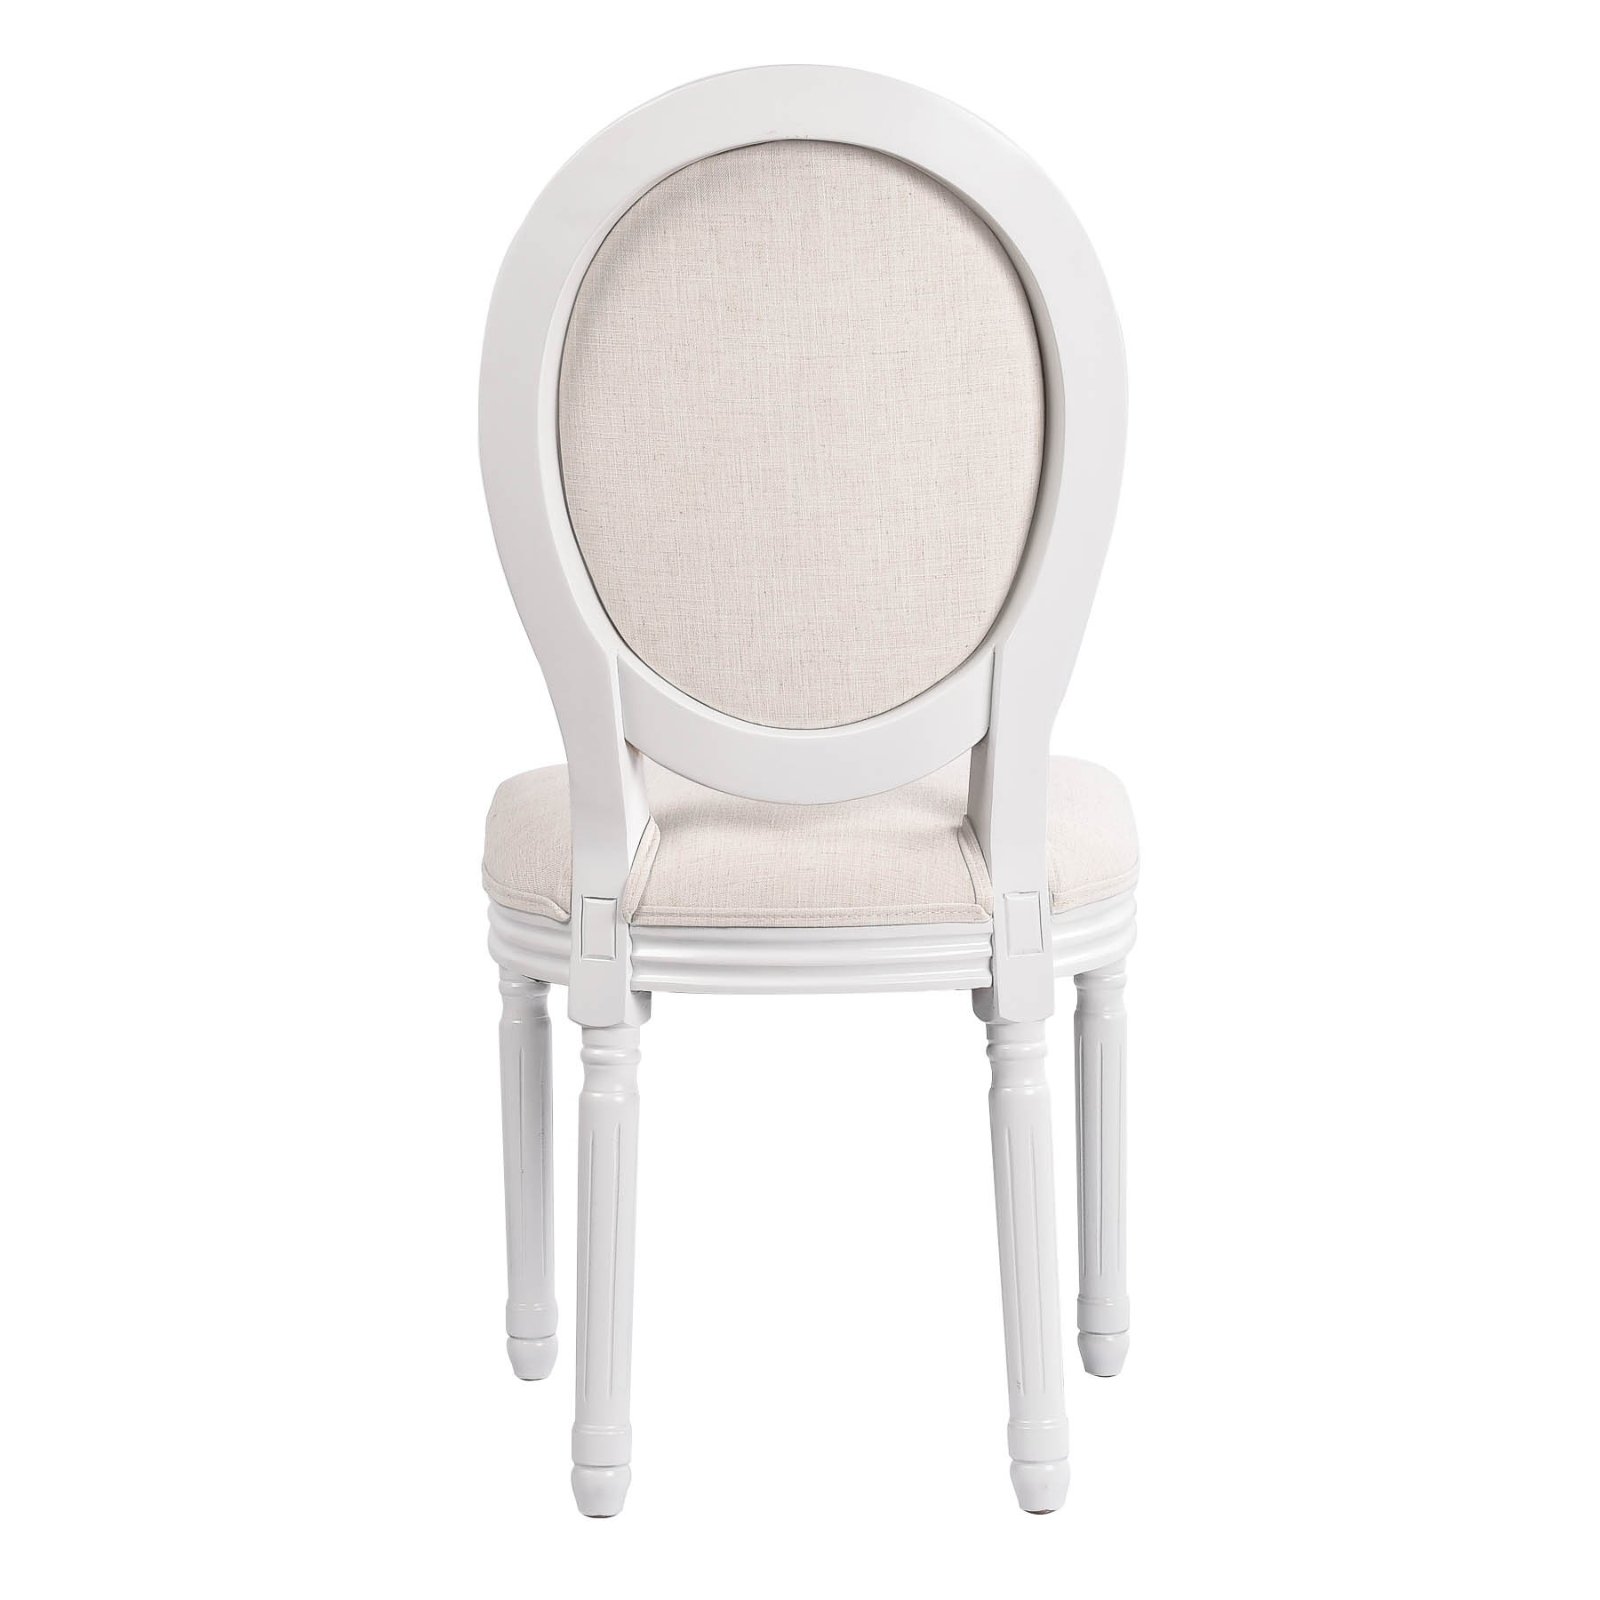 Shop Louis Dining Chair Set of 2 French Provincial Upholstered White ...